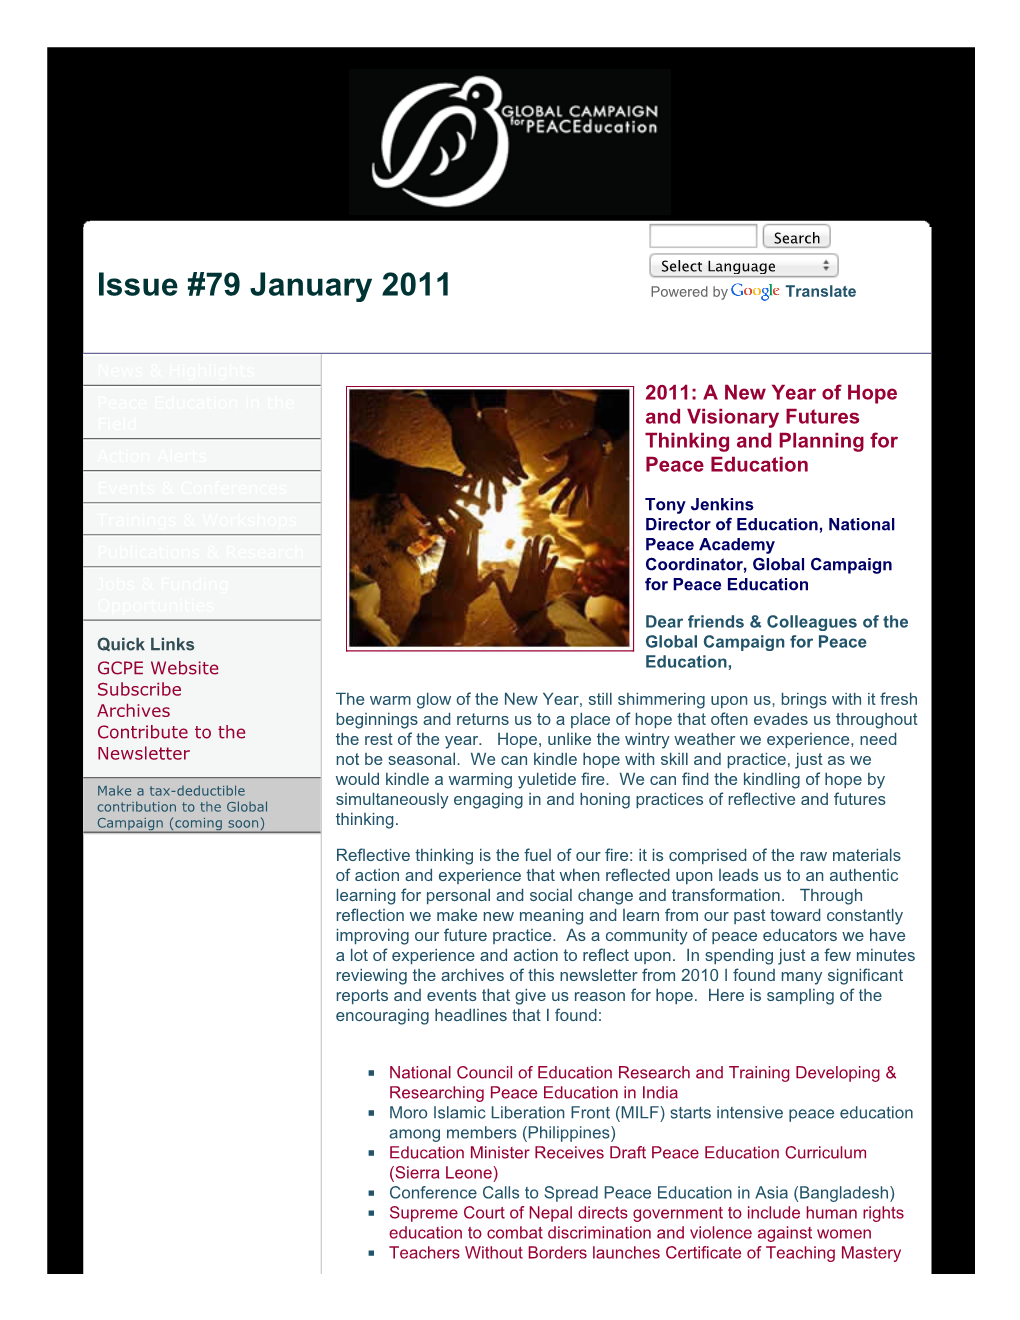 Issue #79 January 2011 Powered by Translate